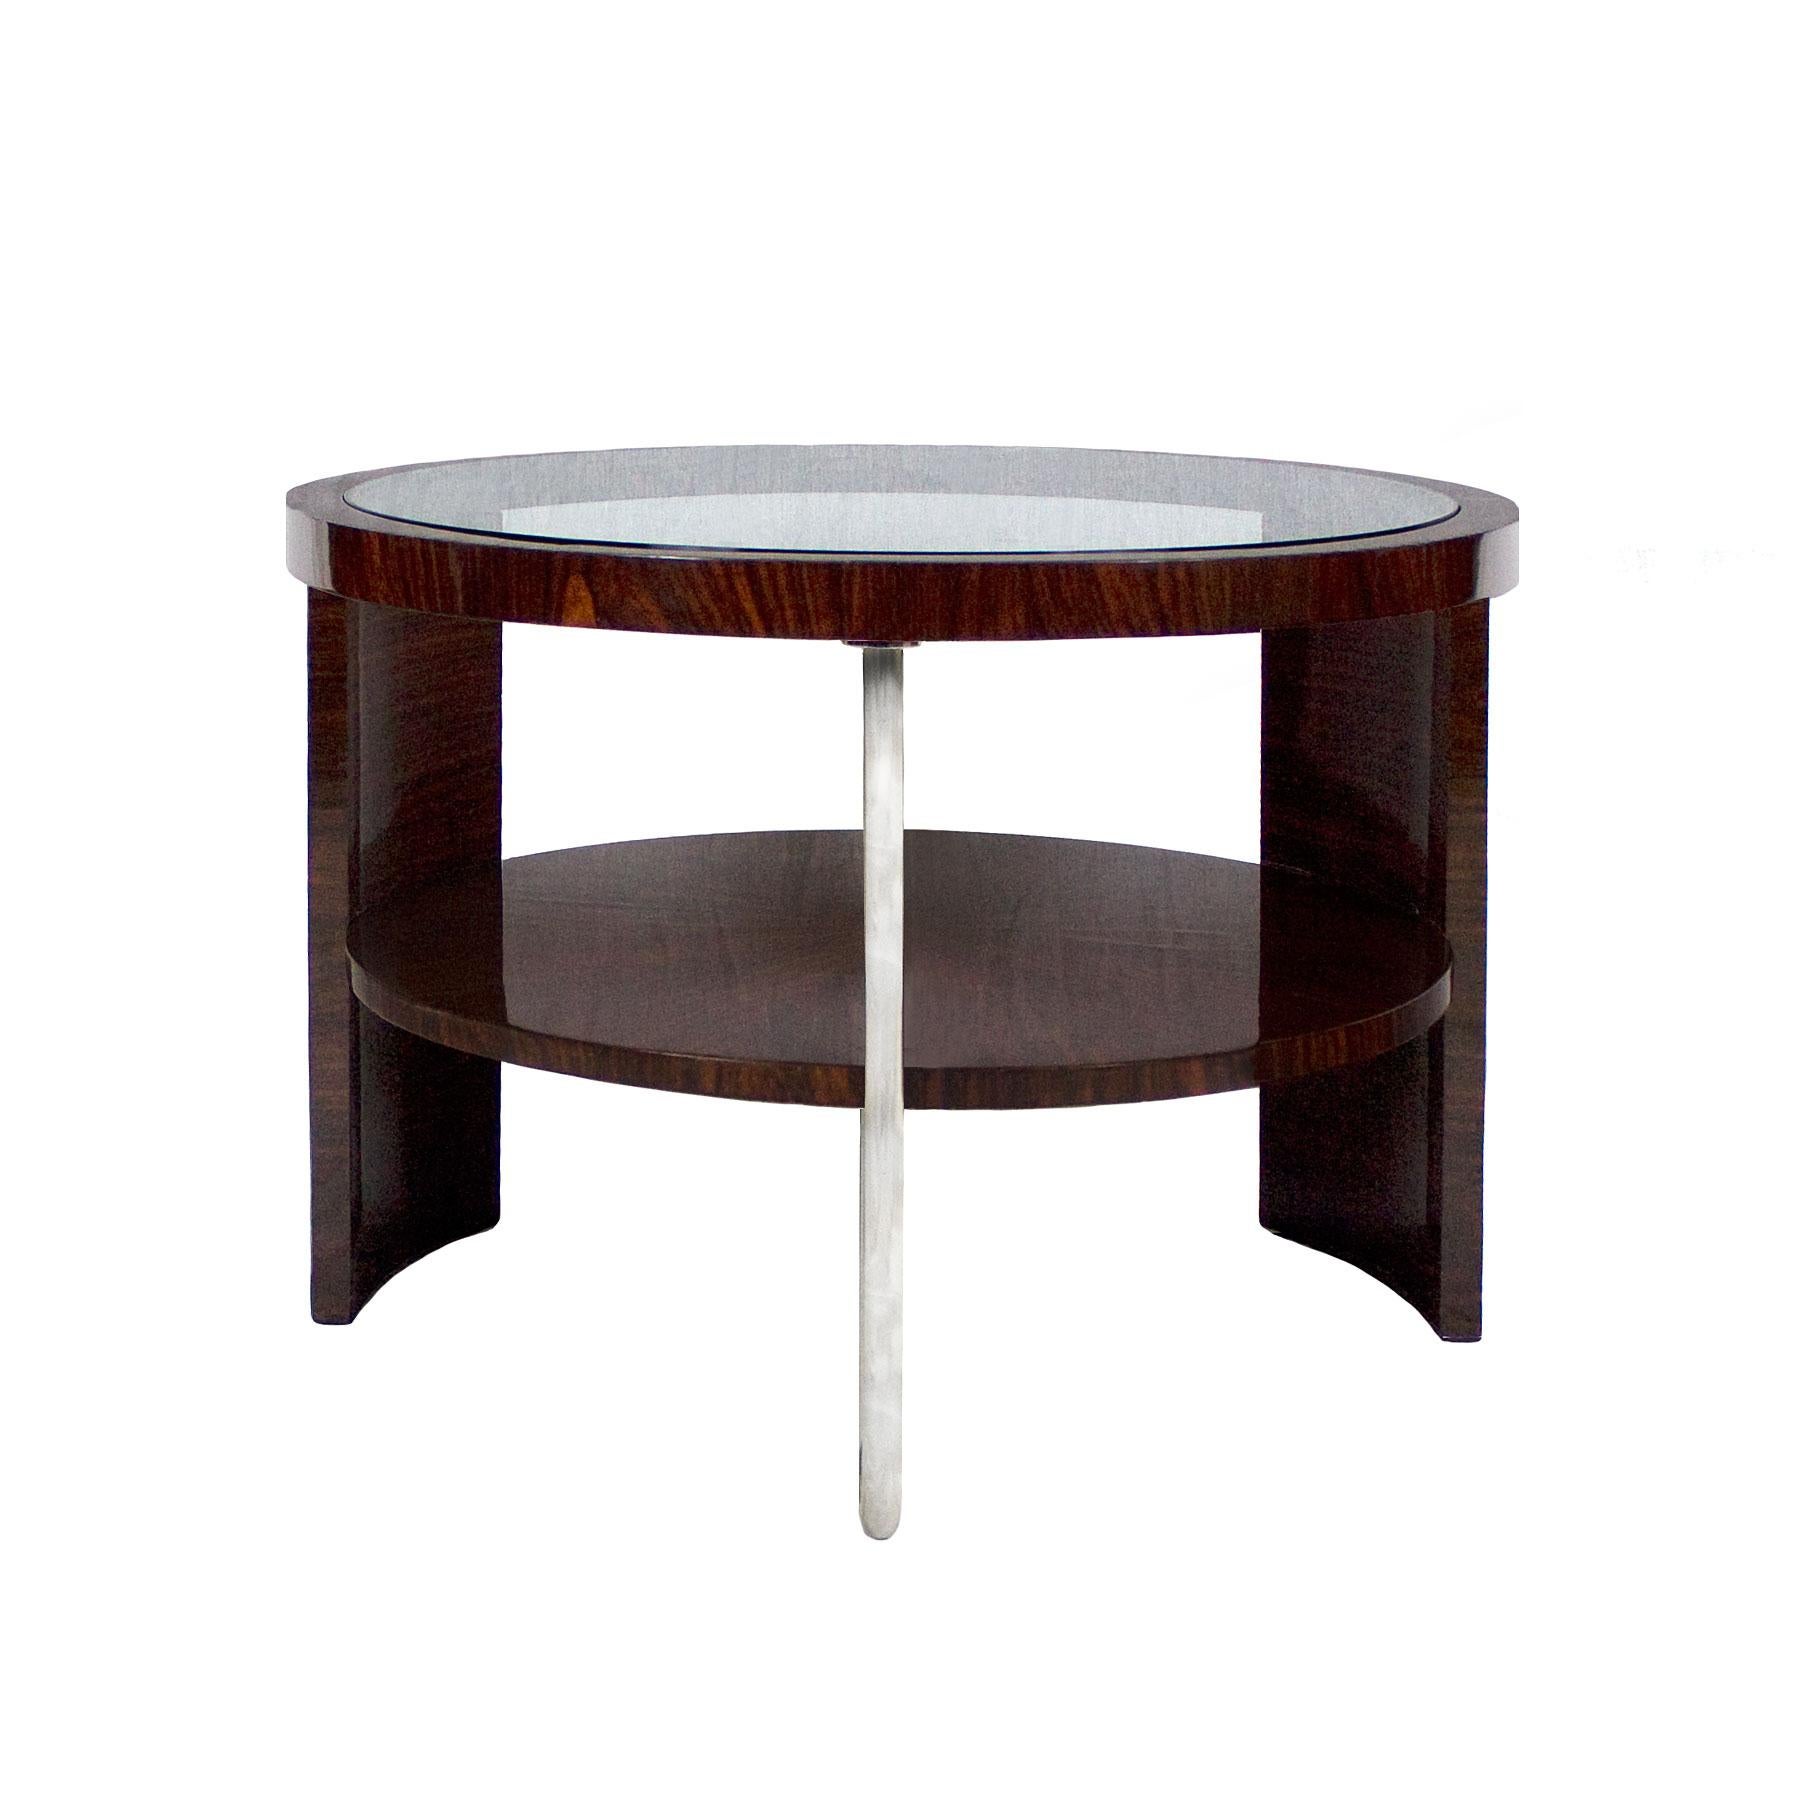 Outstanding Art Deco tripod side table, solid wood with mahogany veneer, French polish. Original glass on top and lower plate with 